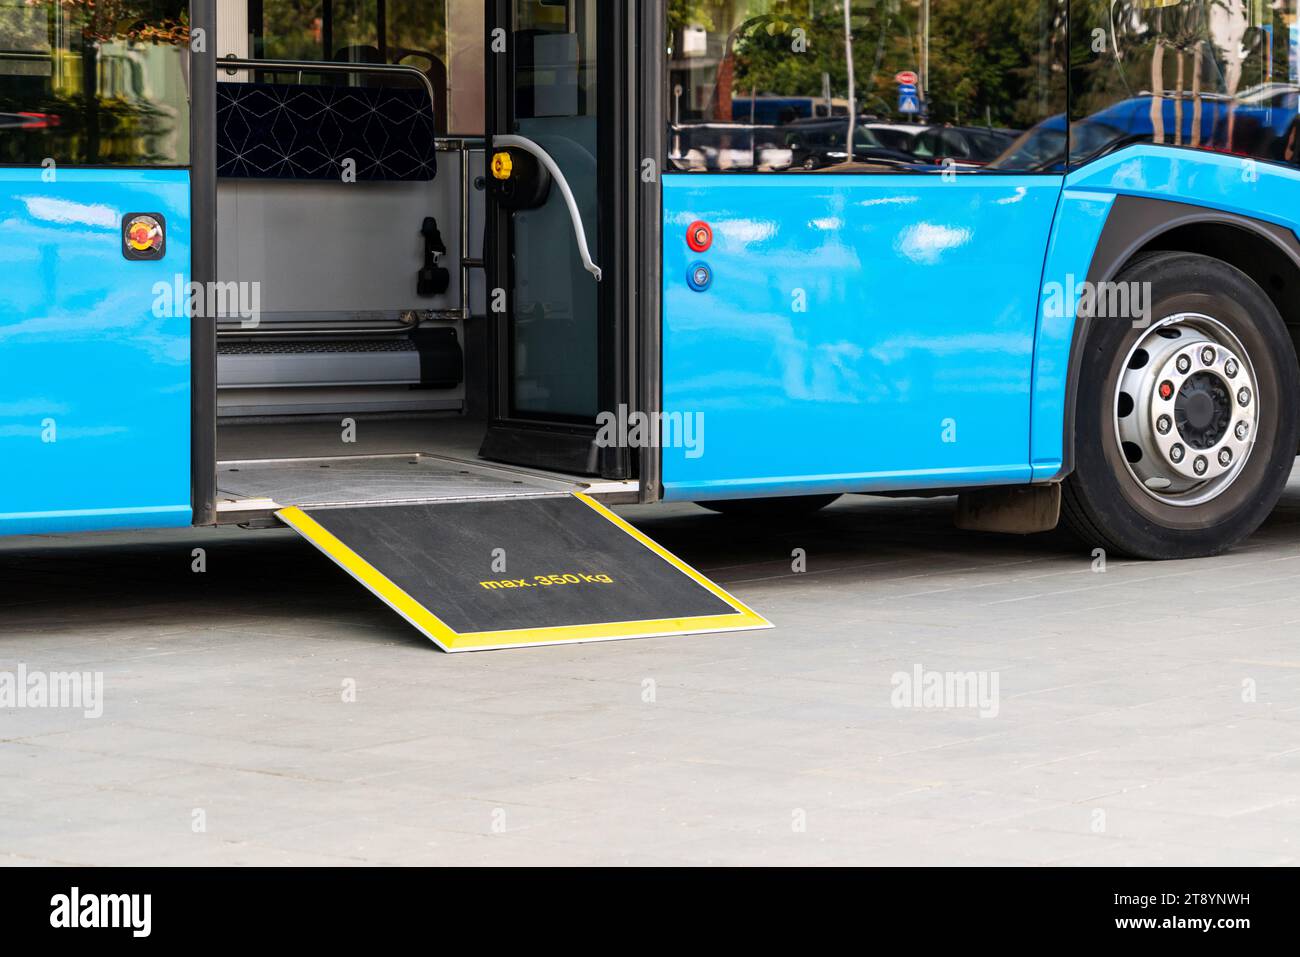 Accessibility in public transport. Bus ramp low floor. Accessible environment. Stock Photo